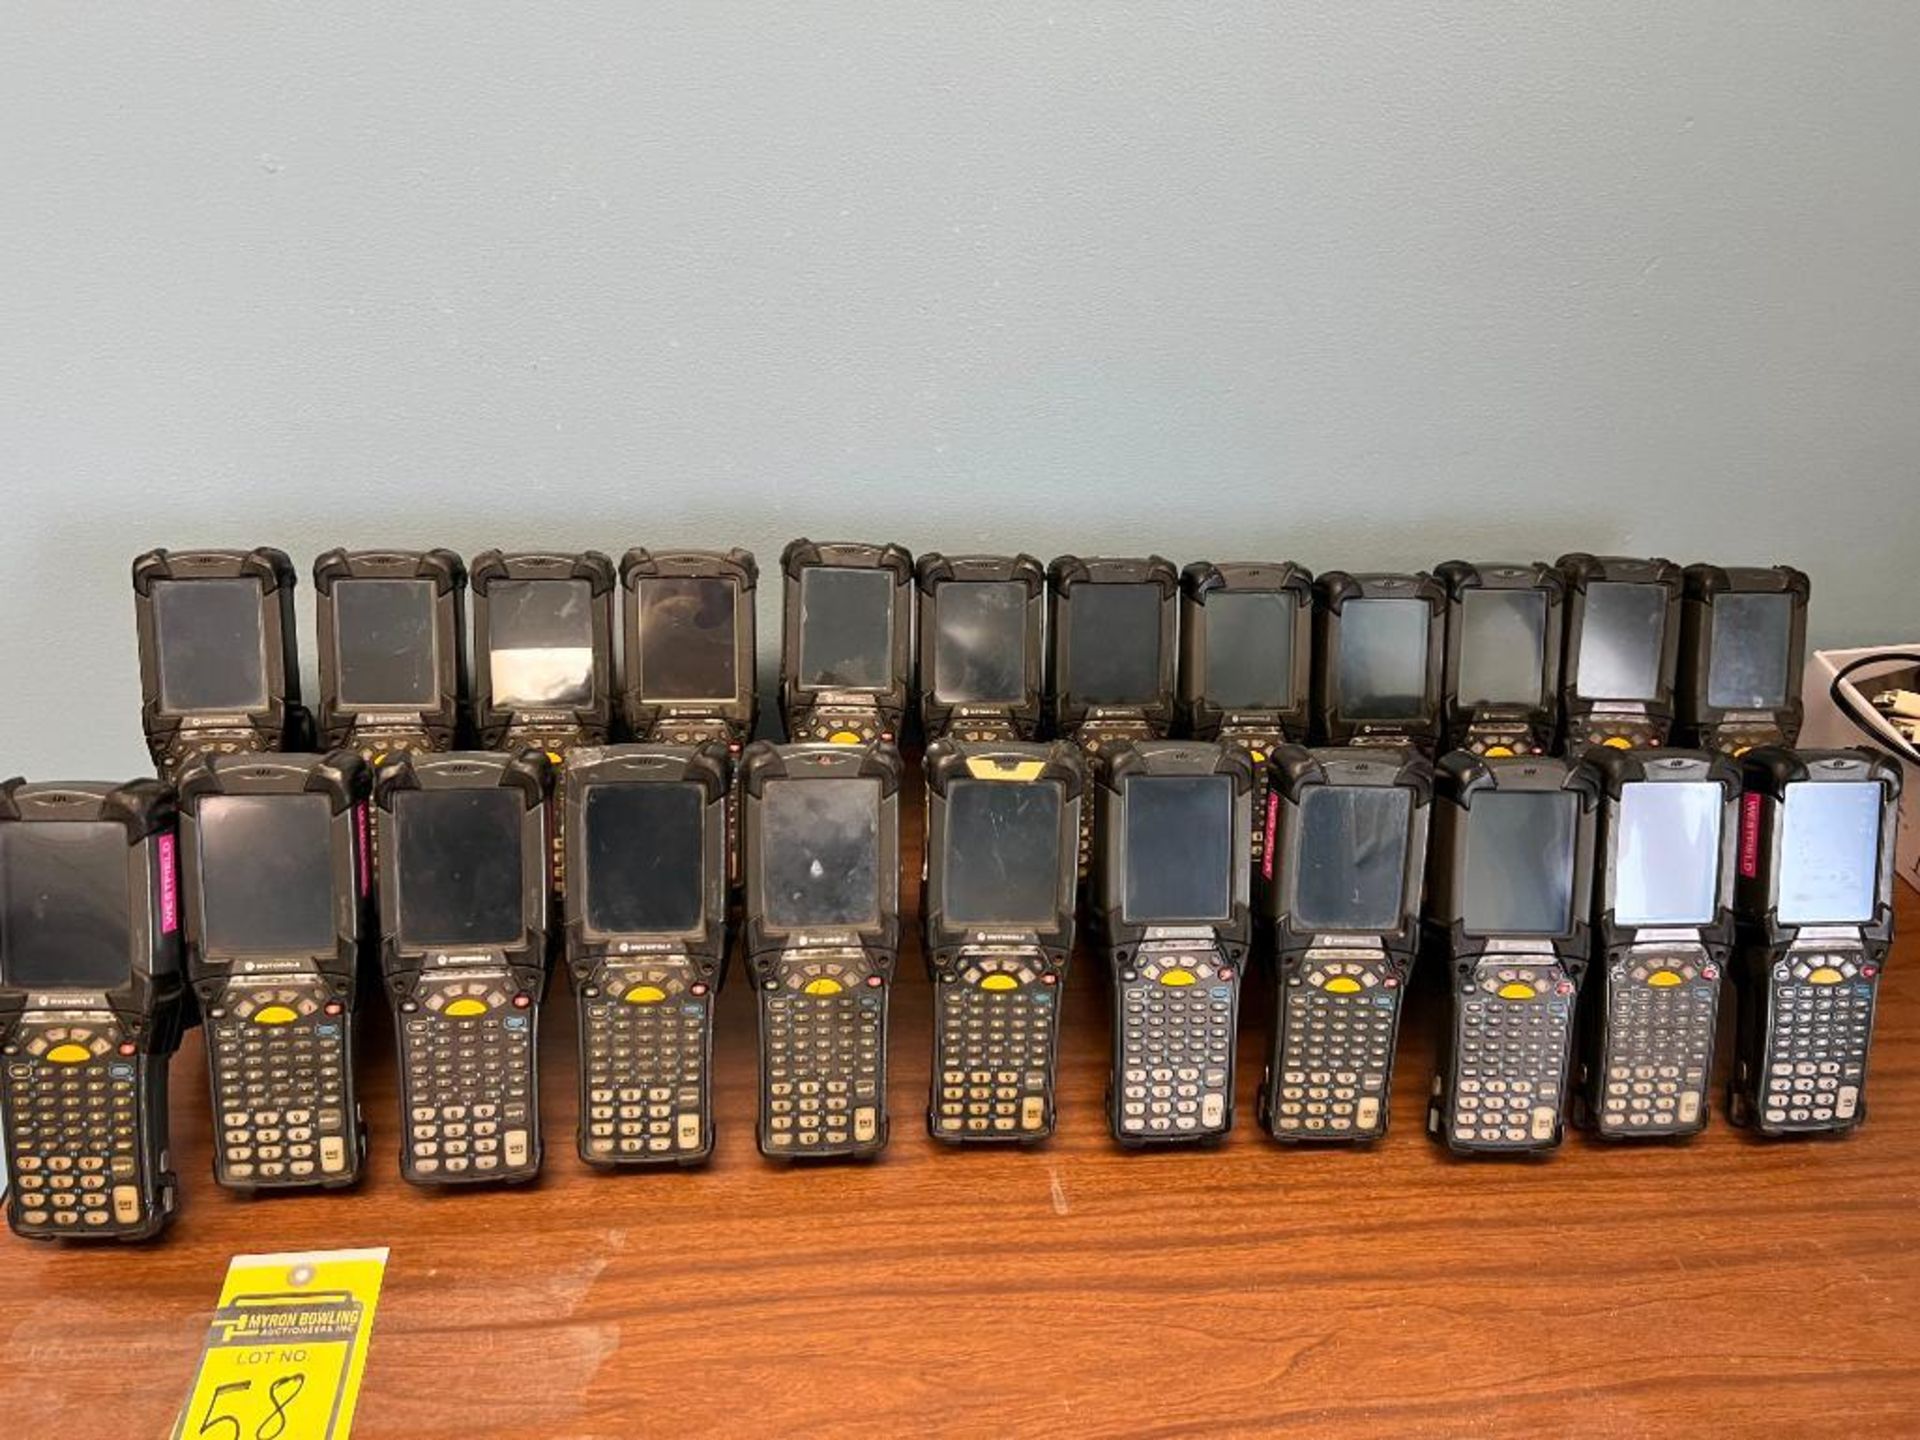 Table w/ (23) Portable Motorola RF Scanners, Model MC9090, w/ Batteries & Chargers - Image 2 of 4